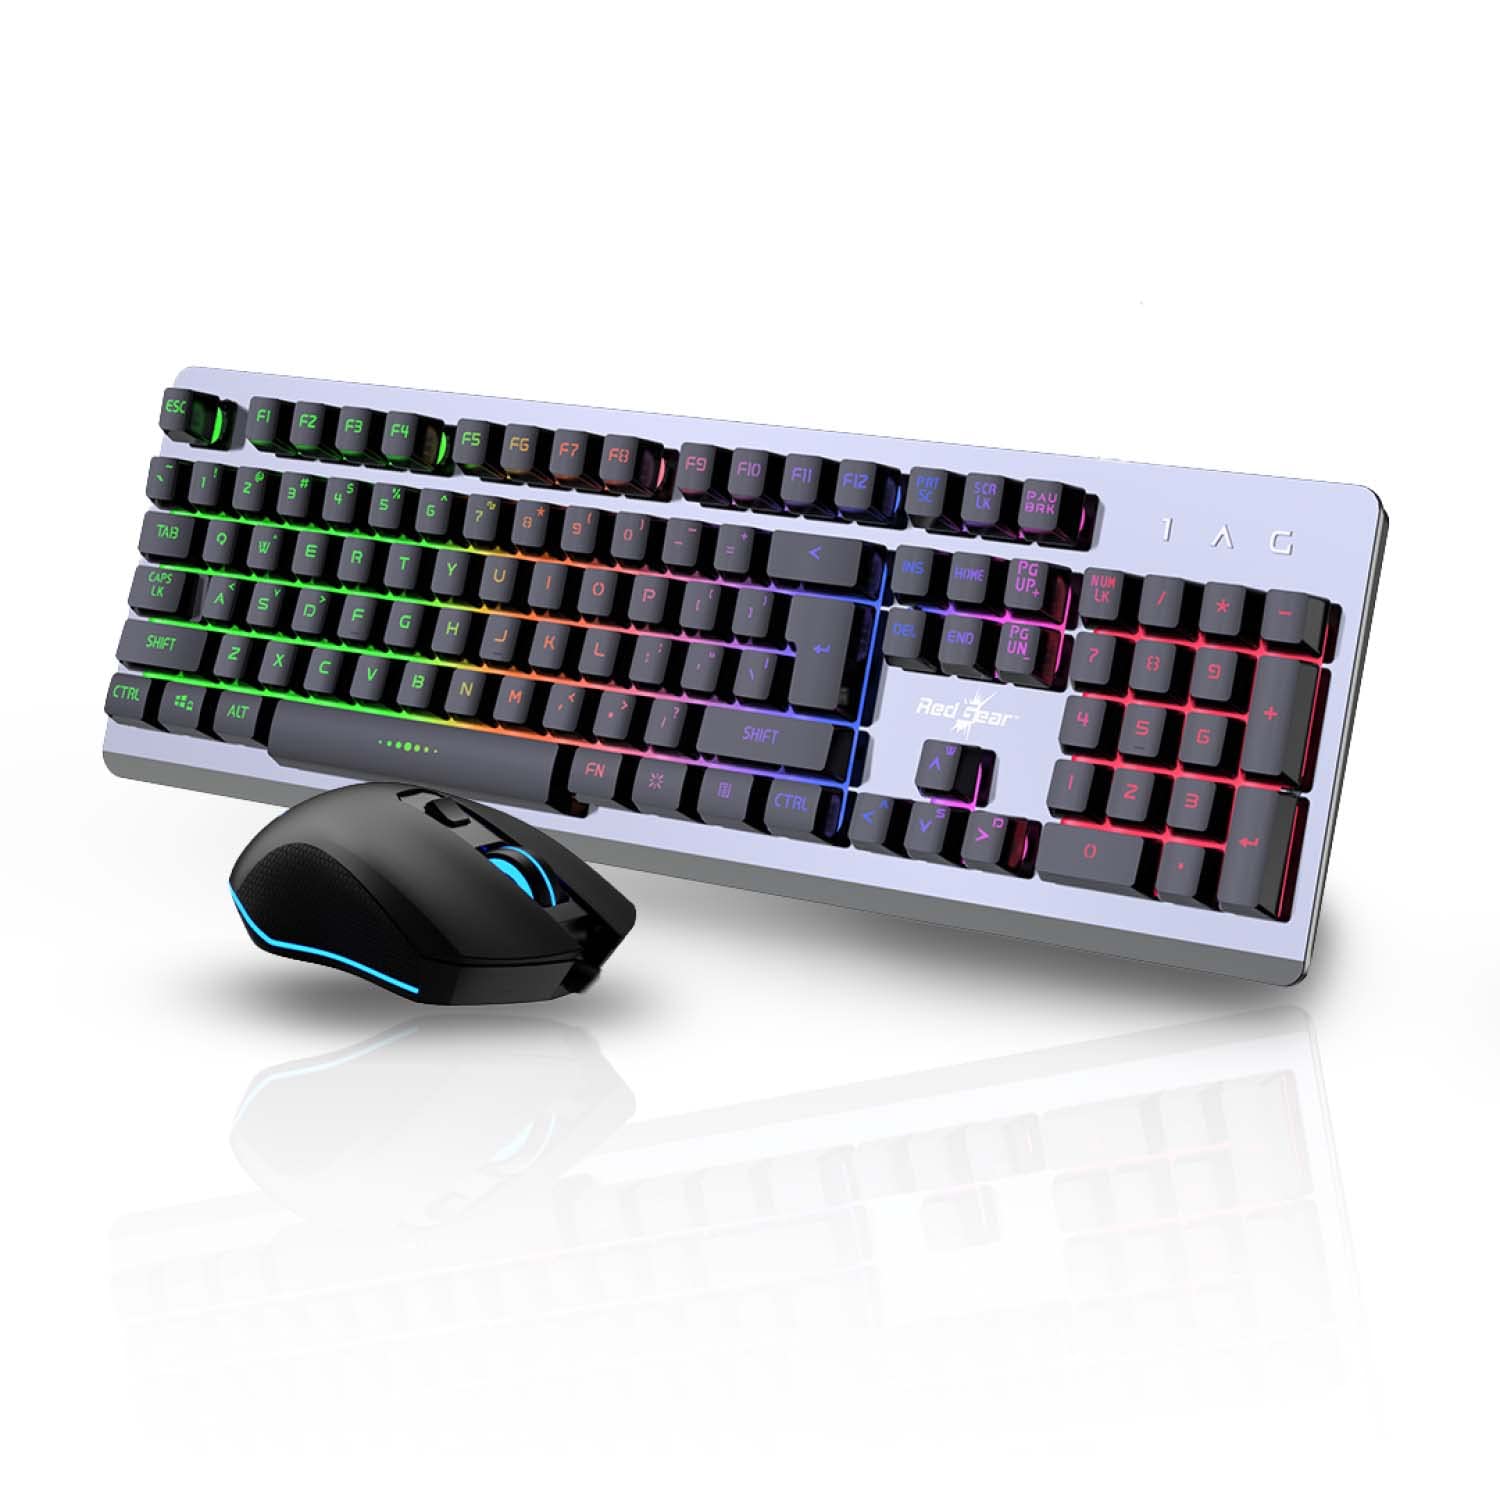 Redgear GC-100 Gaming Keyboard and Mouse Combo